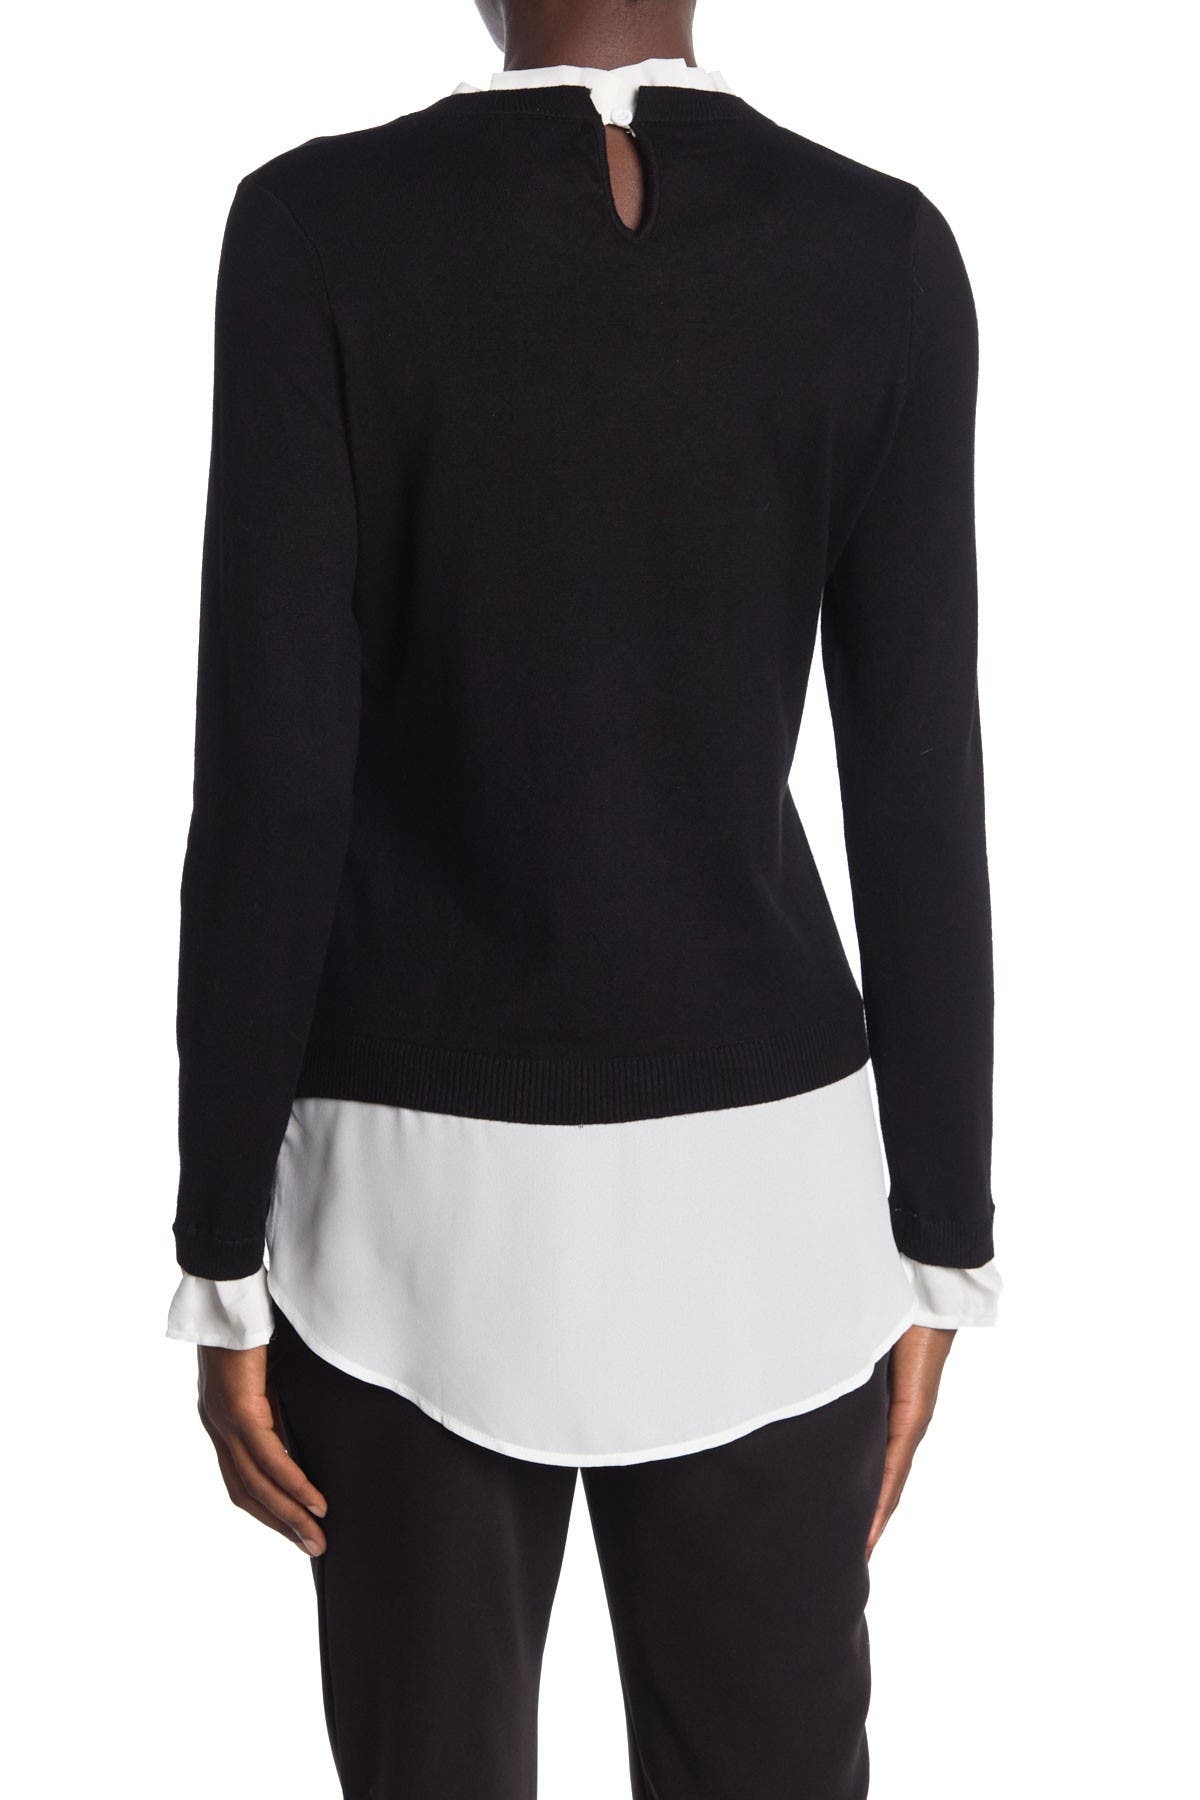 Adrianna Papell | Ruffle Neck Twofer Sweater | Nordstrom Rack